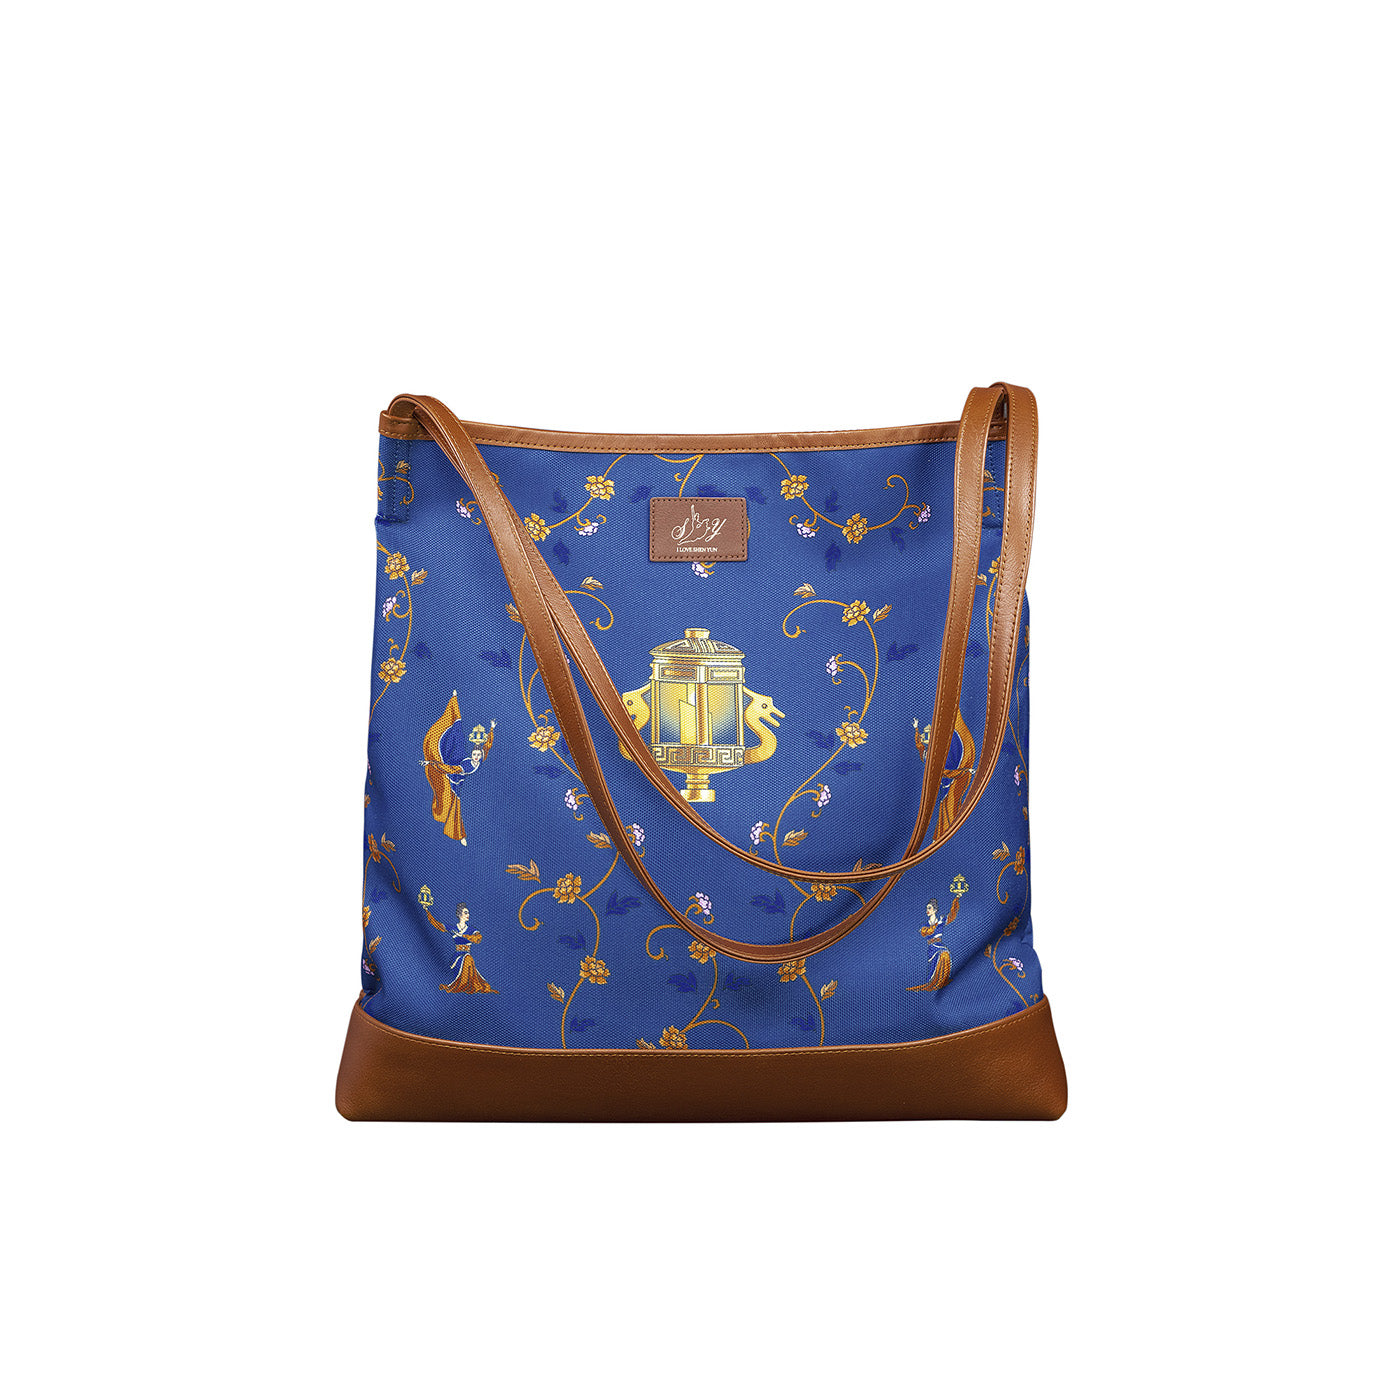 Lantern Grace Tote Bag with Leather Handle - Blue